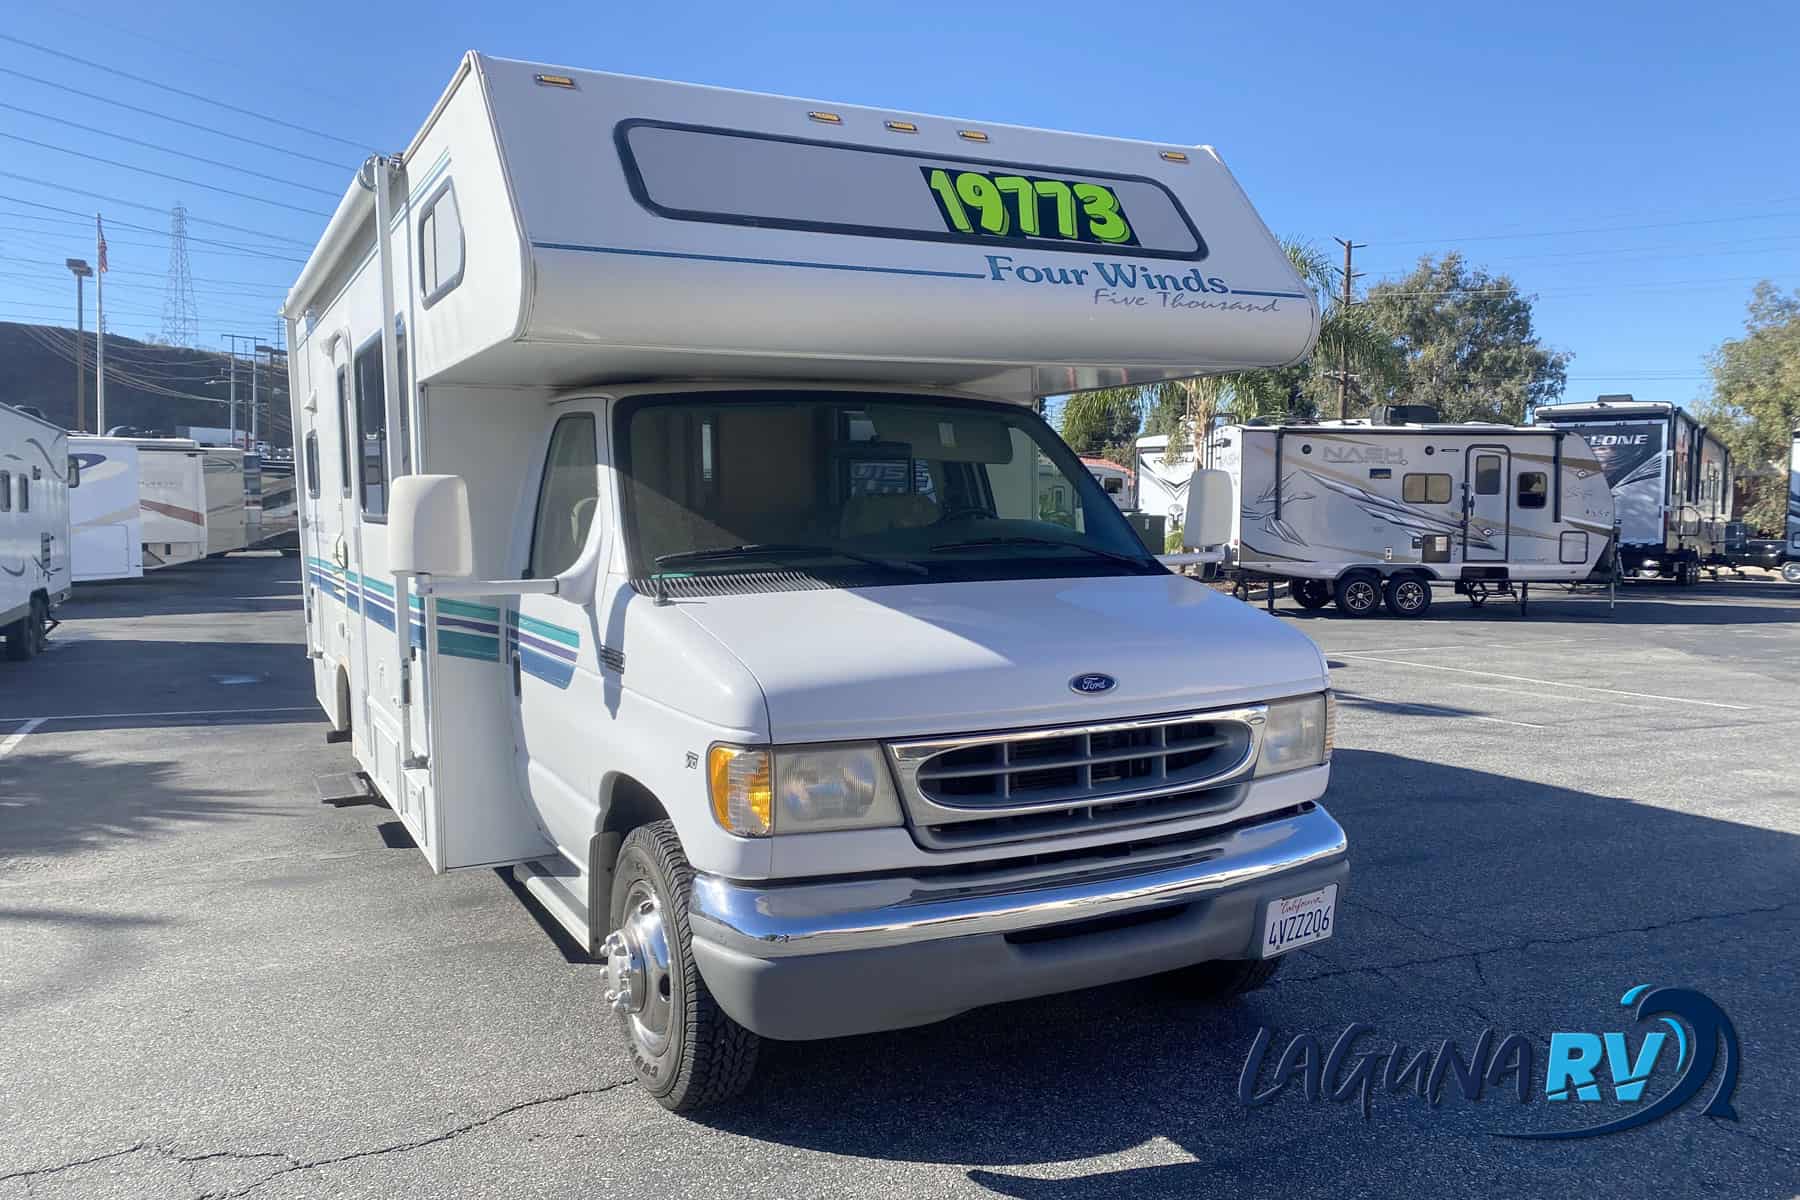 2000 Four Winds 5000 22RK Used Class C RV For Sale C00207 01 